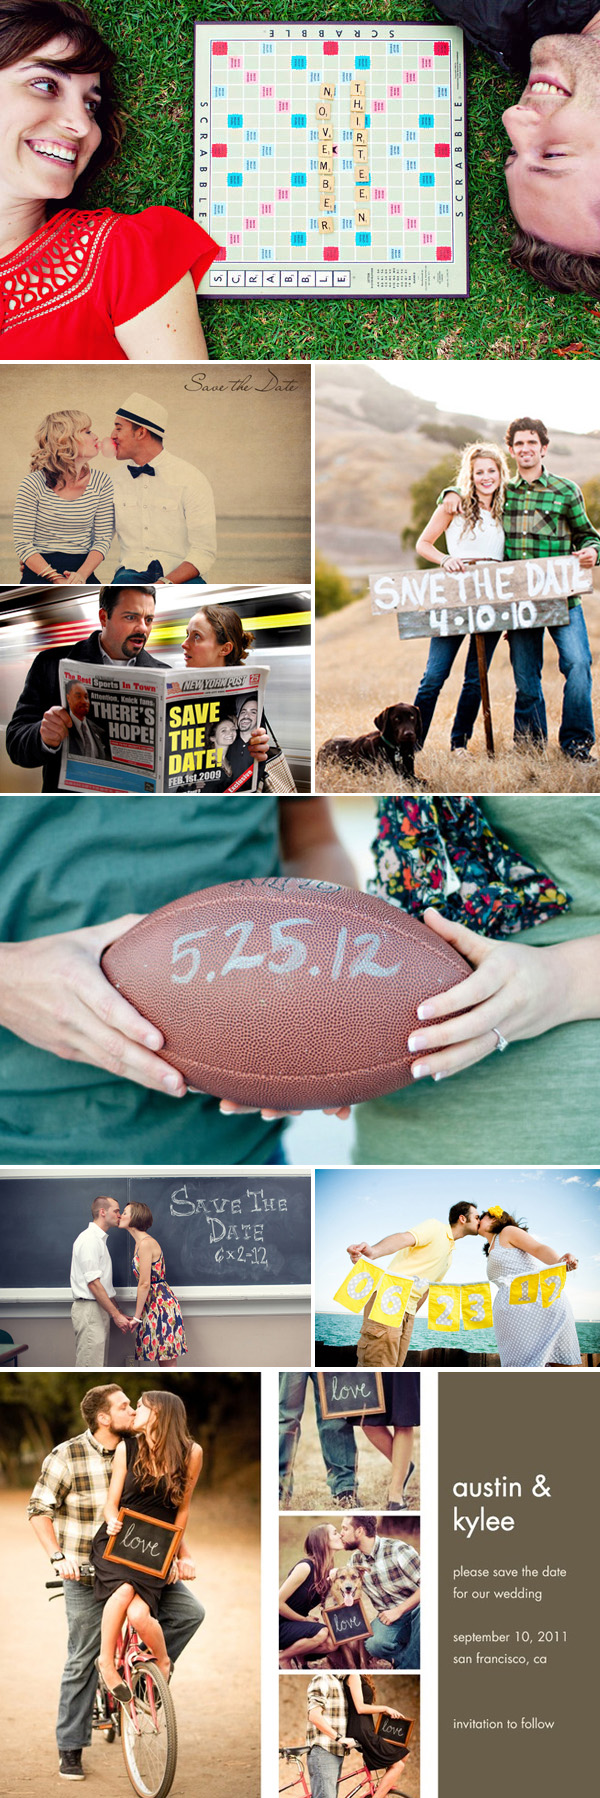 funny save the date photo ideas